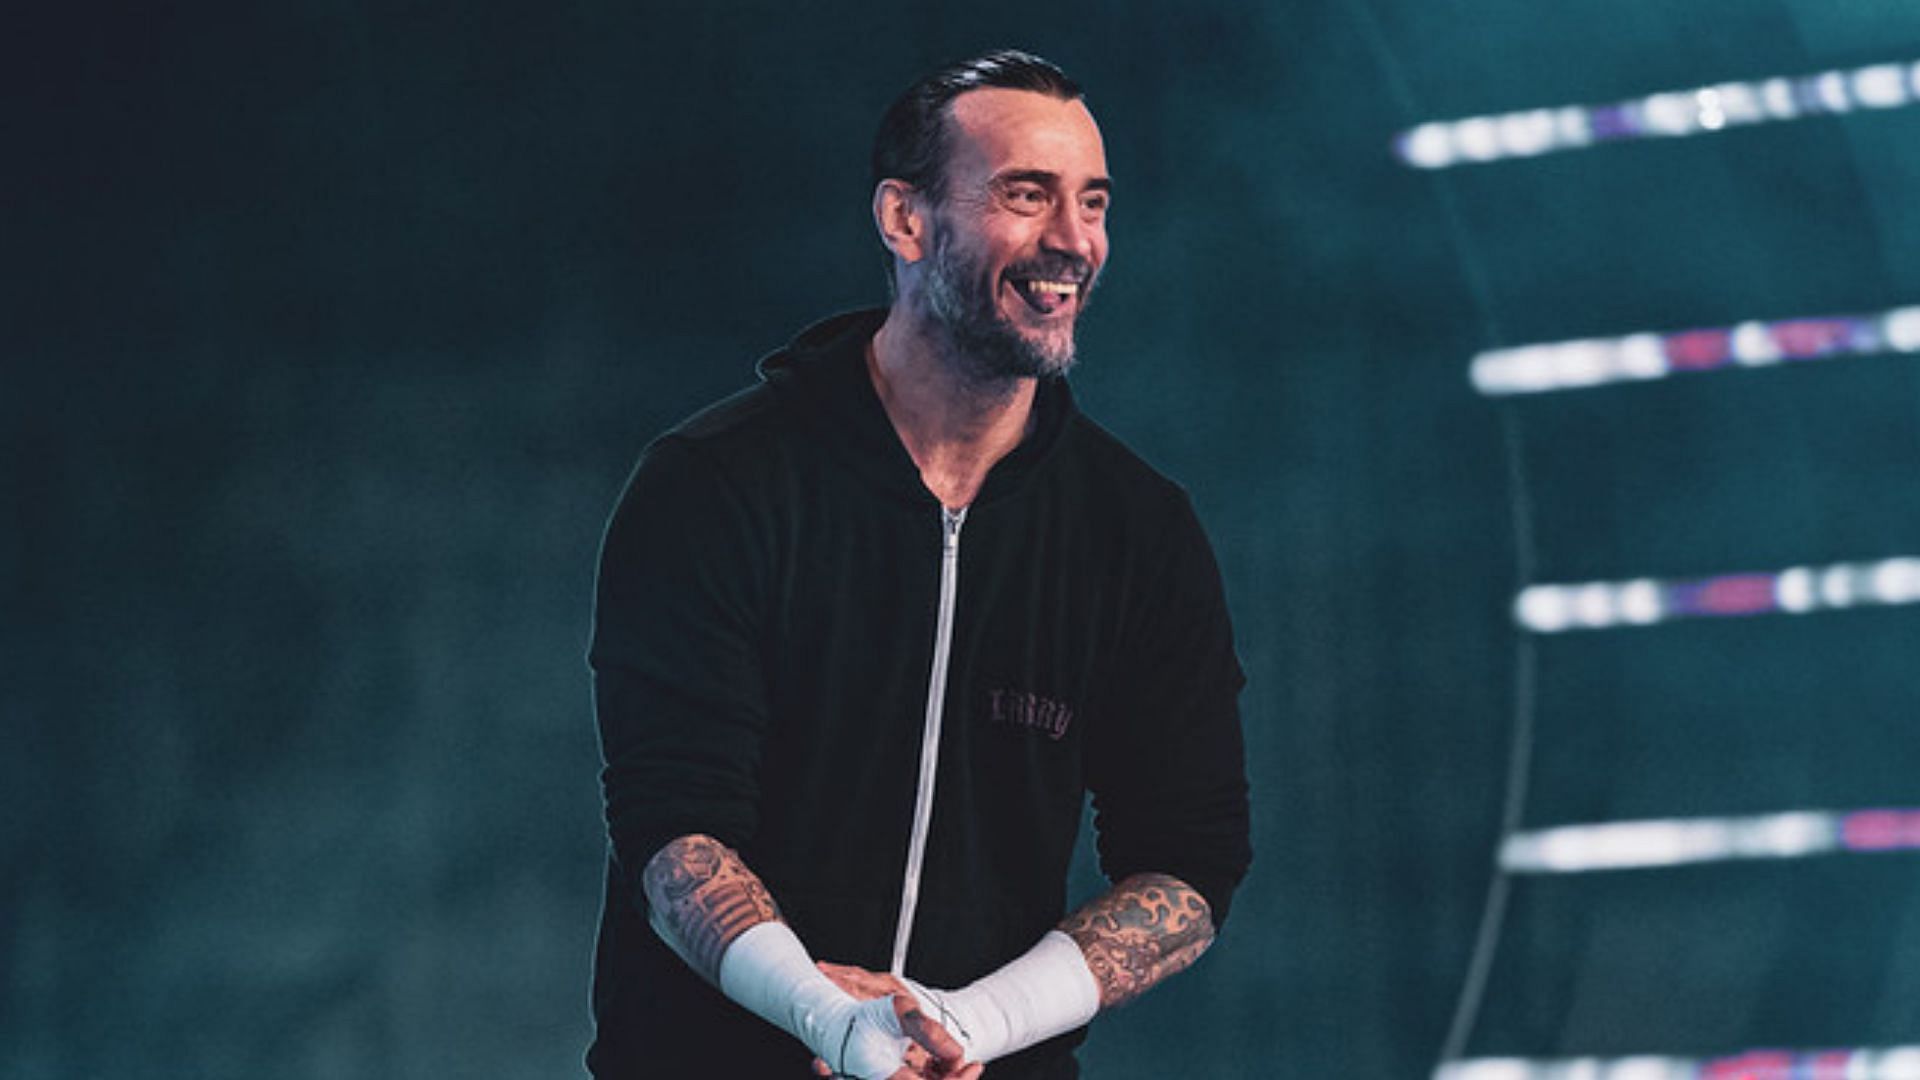 Could CM Punk potentially return to AEW?